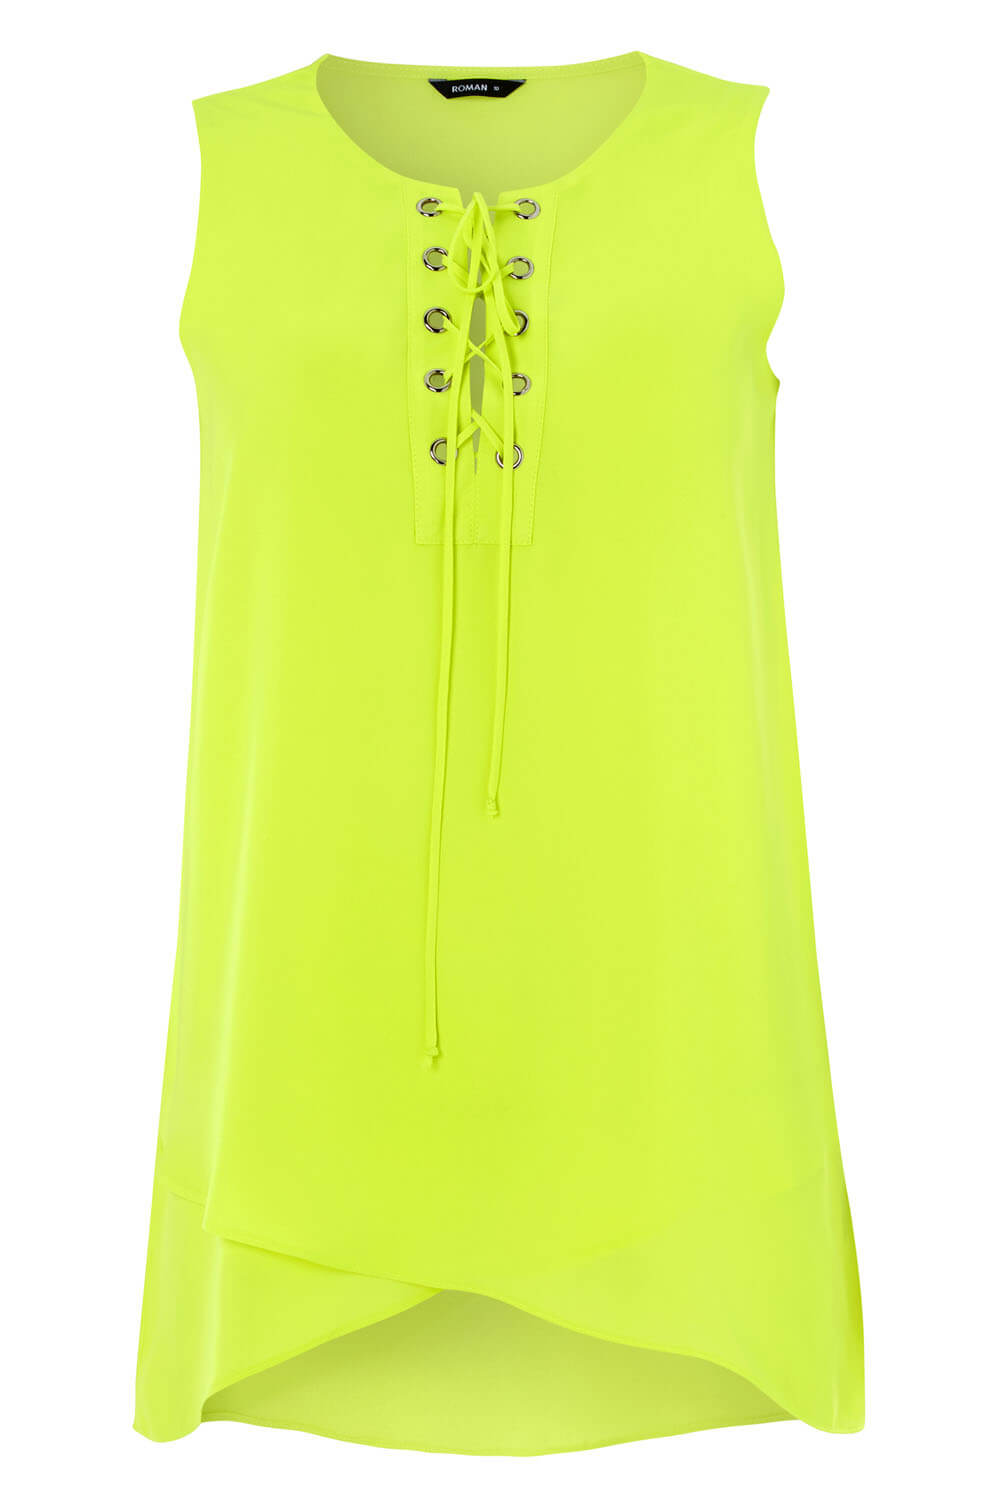 Lime Eyelet Detail Lace Up Vest Top, Image 4 of 8